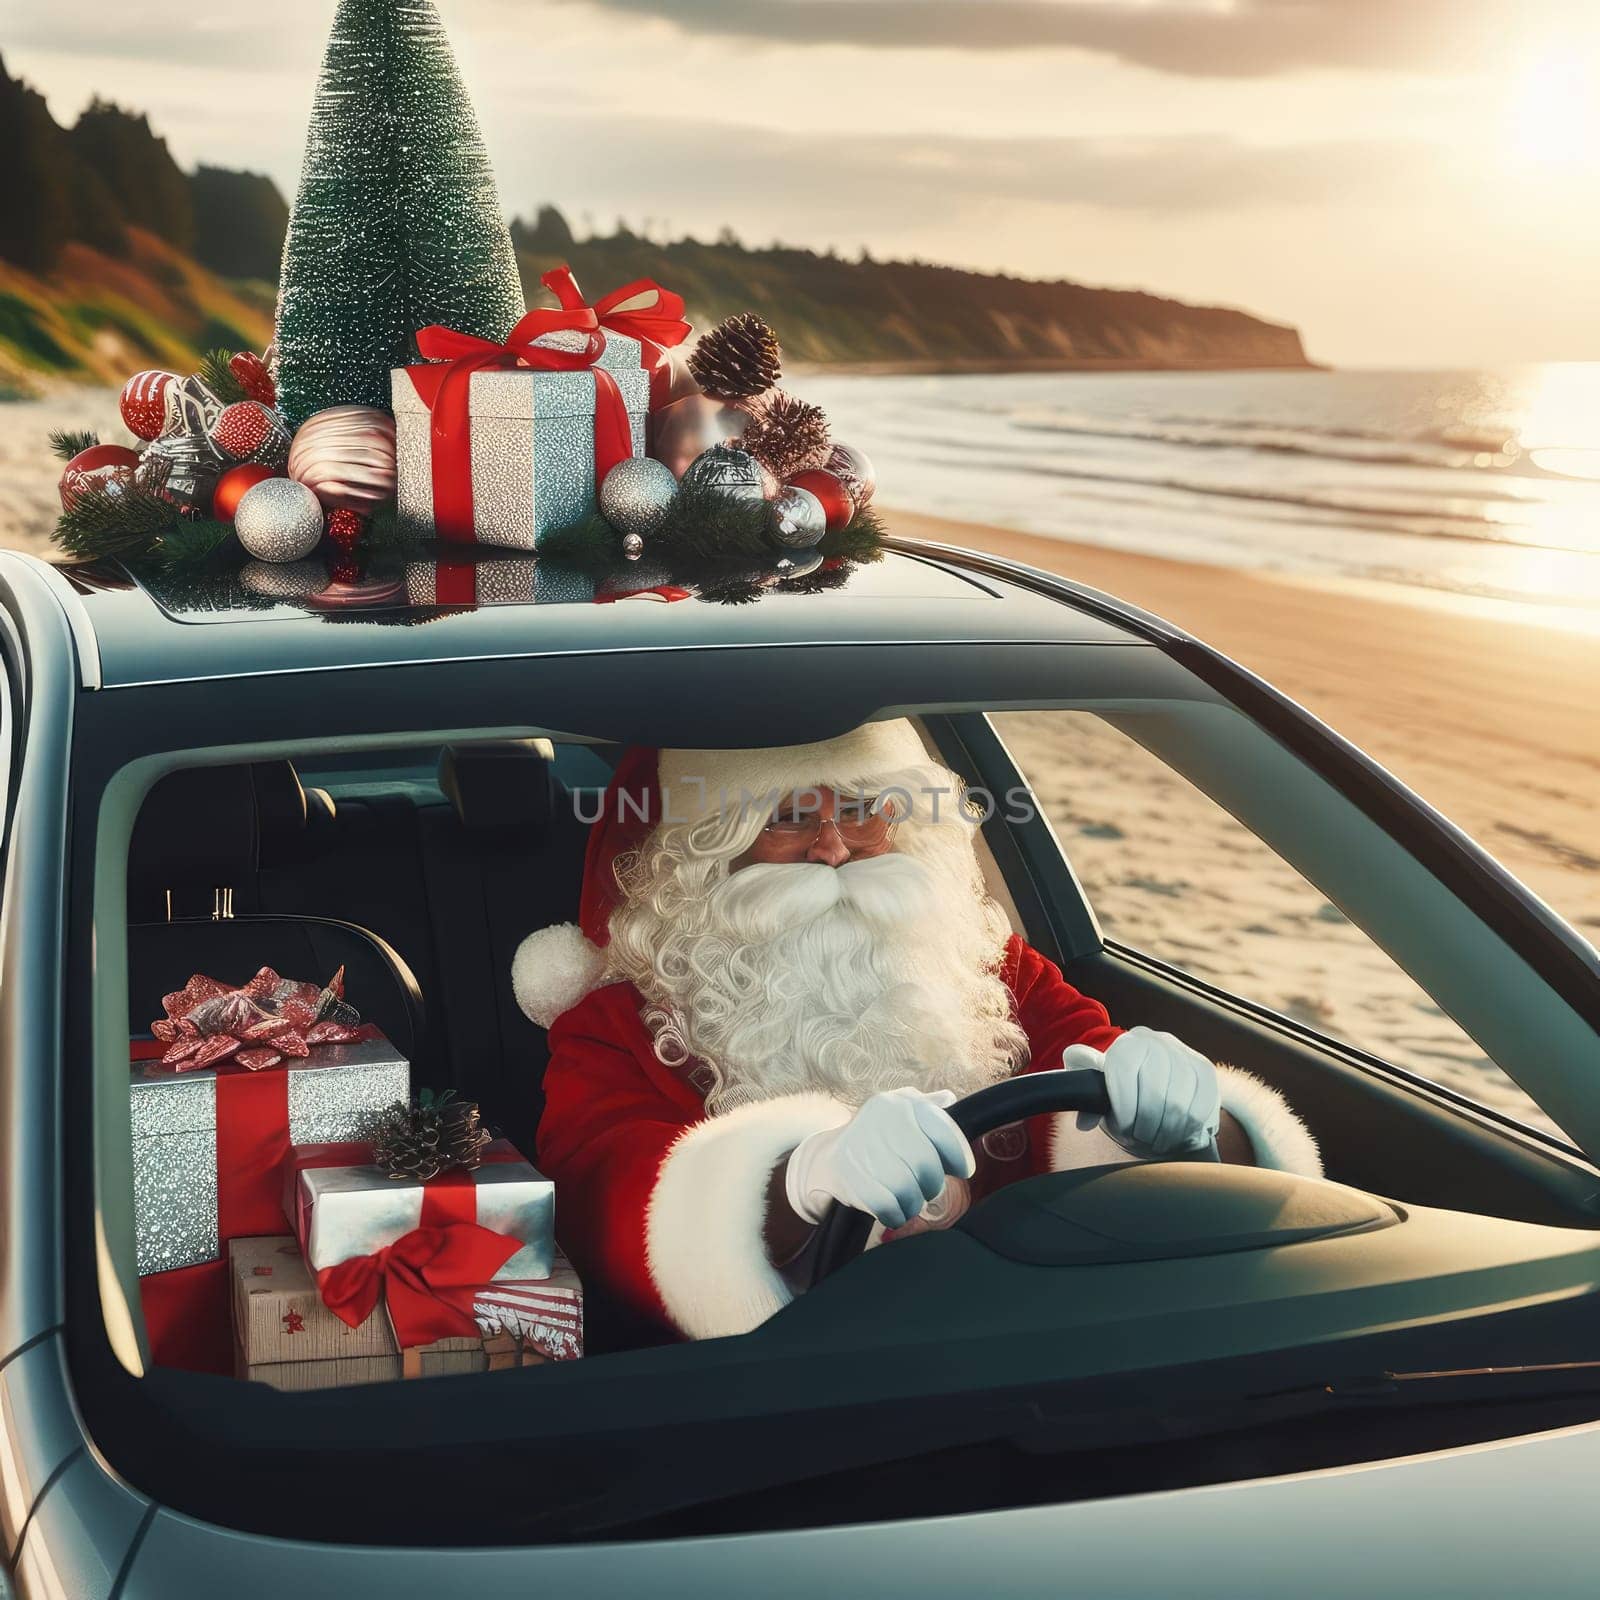 Christmas is coming. Santa Claus on car delivering New Year gifts and Christmas tree.